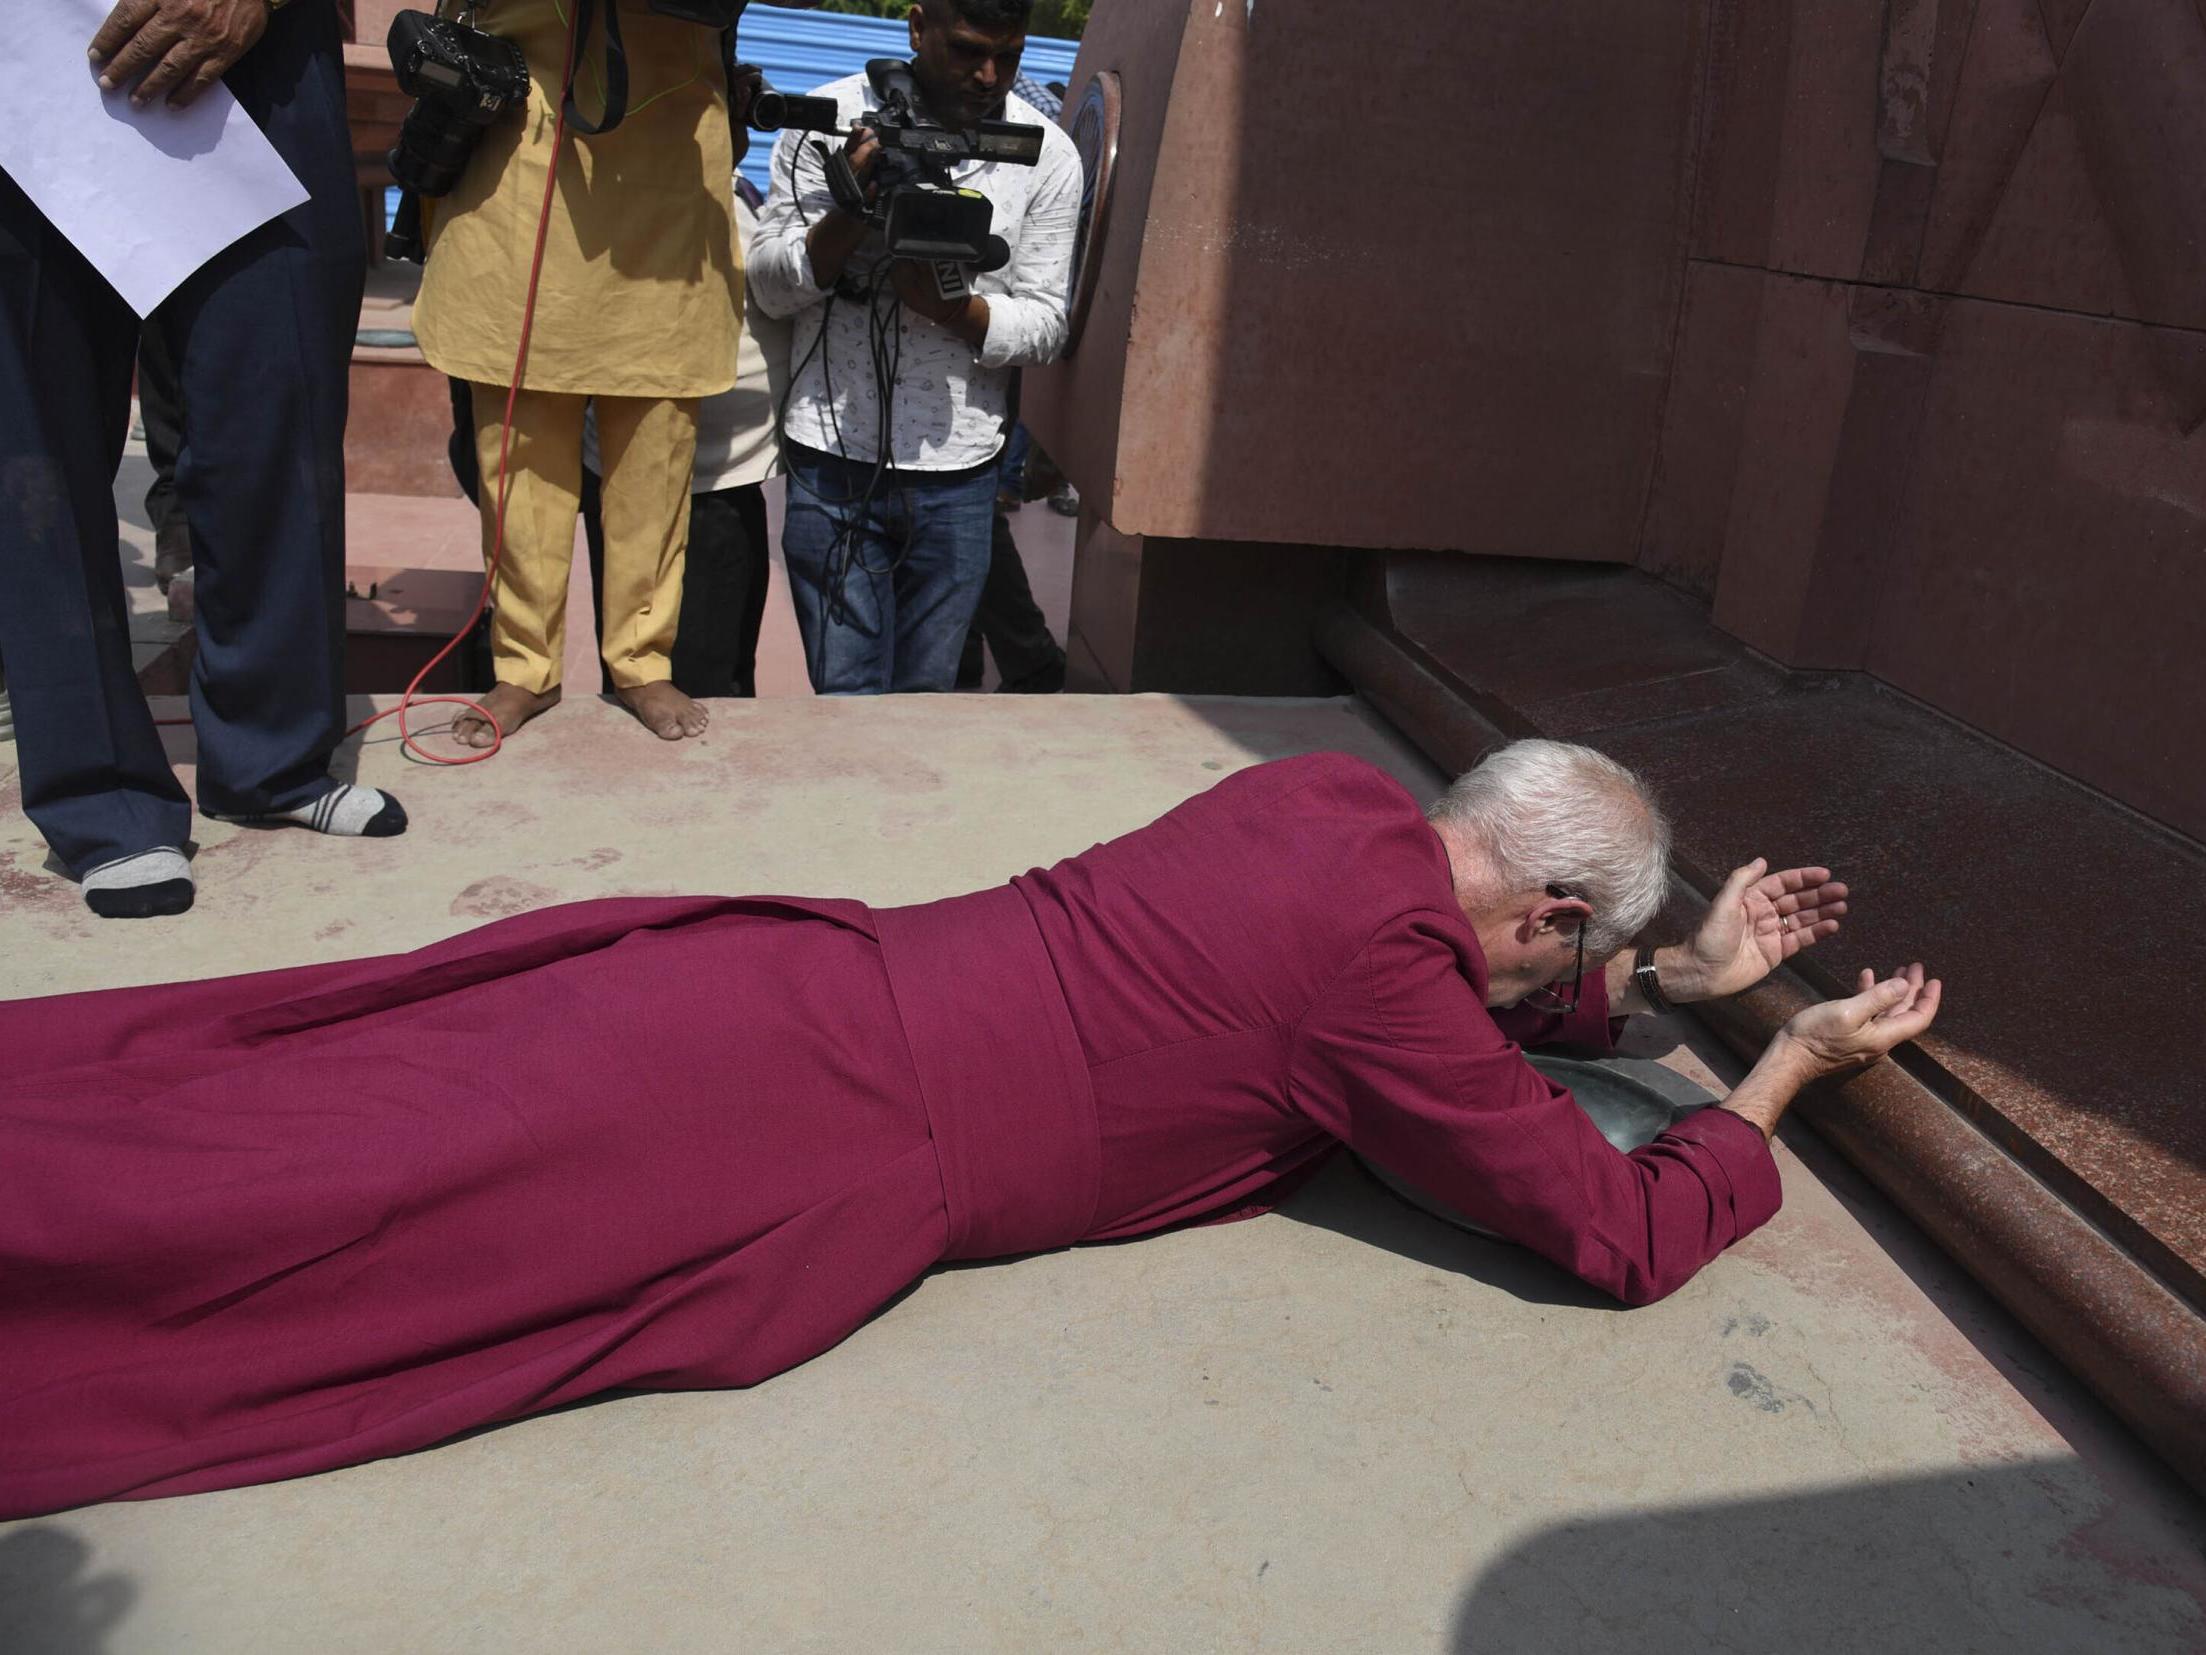 Archbishop of Canterbury prostrates self before Amritsar massacre memorial as he recognises 'sins of British colonial history'